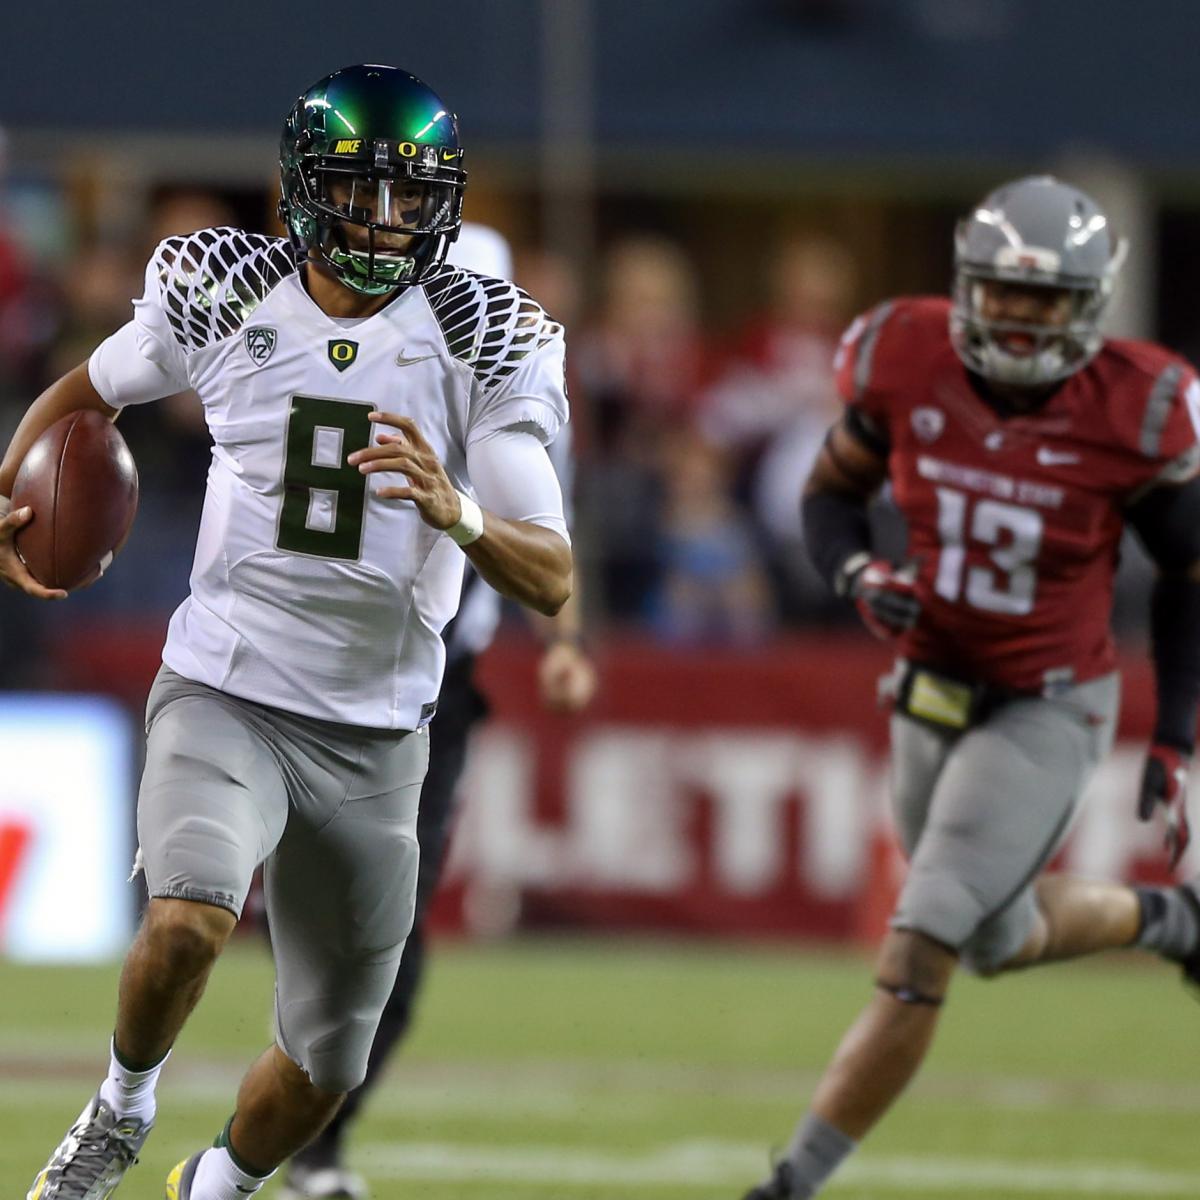 Washington State vs. Oregon: TV Info, Spread, Injury Updates, Game Time and More